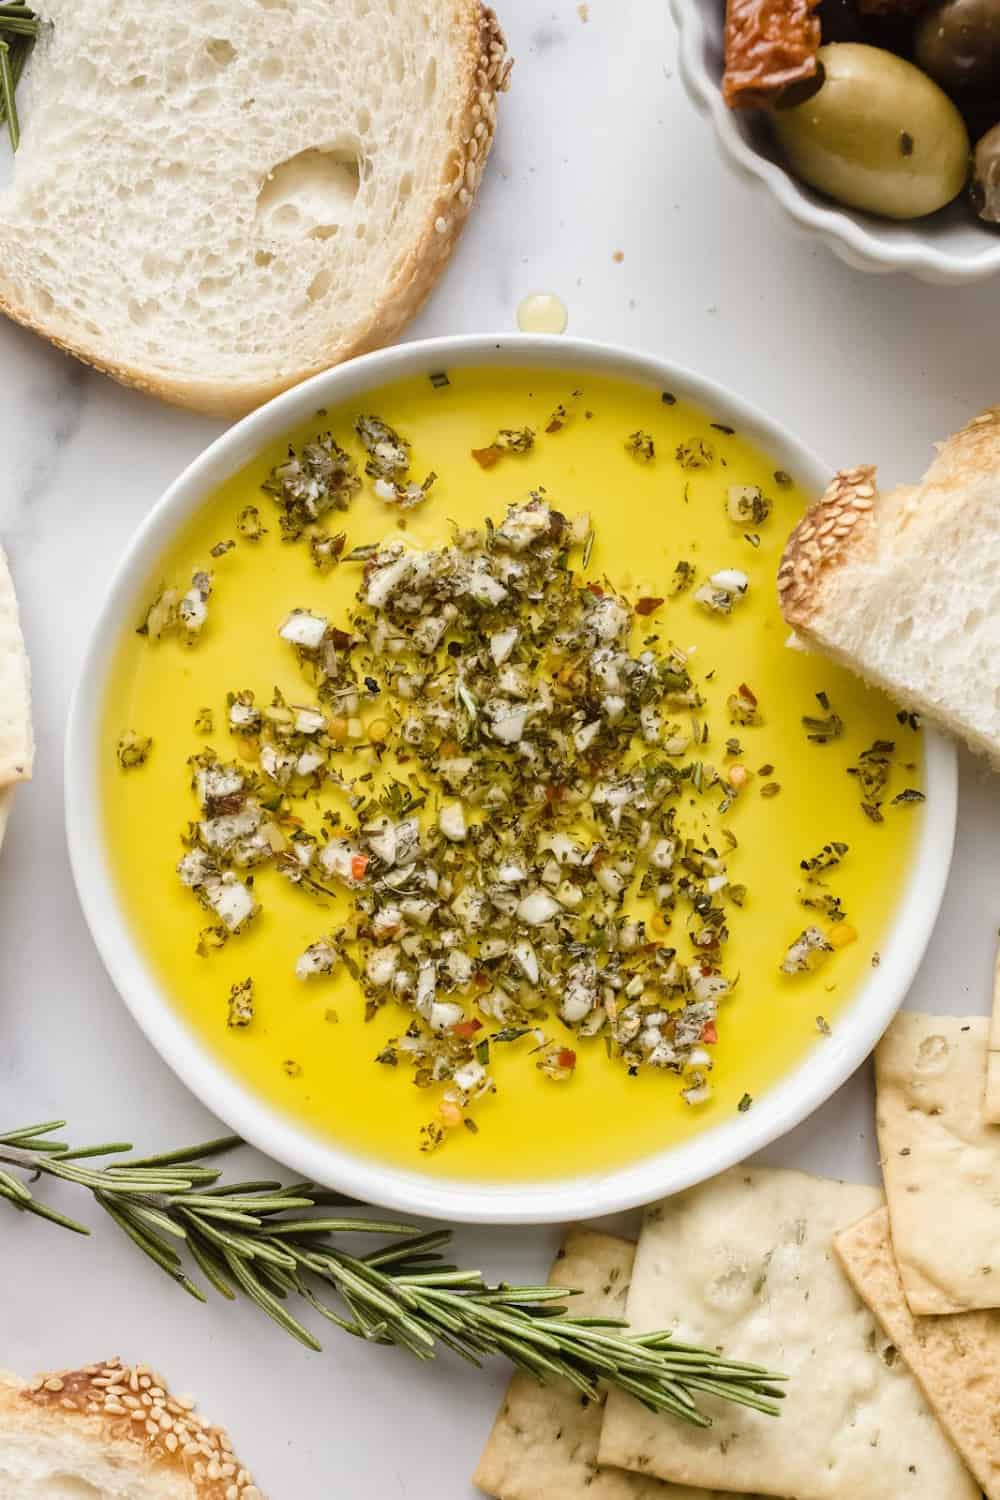 Close up of a bowl with olive oil herb dip next to bread and fresh rosemary